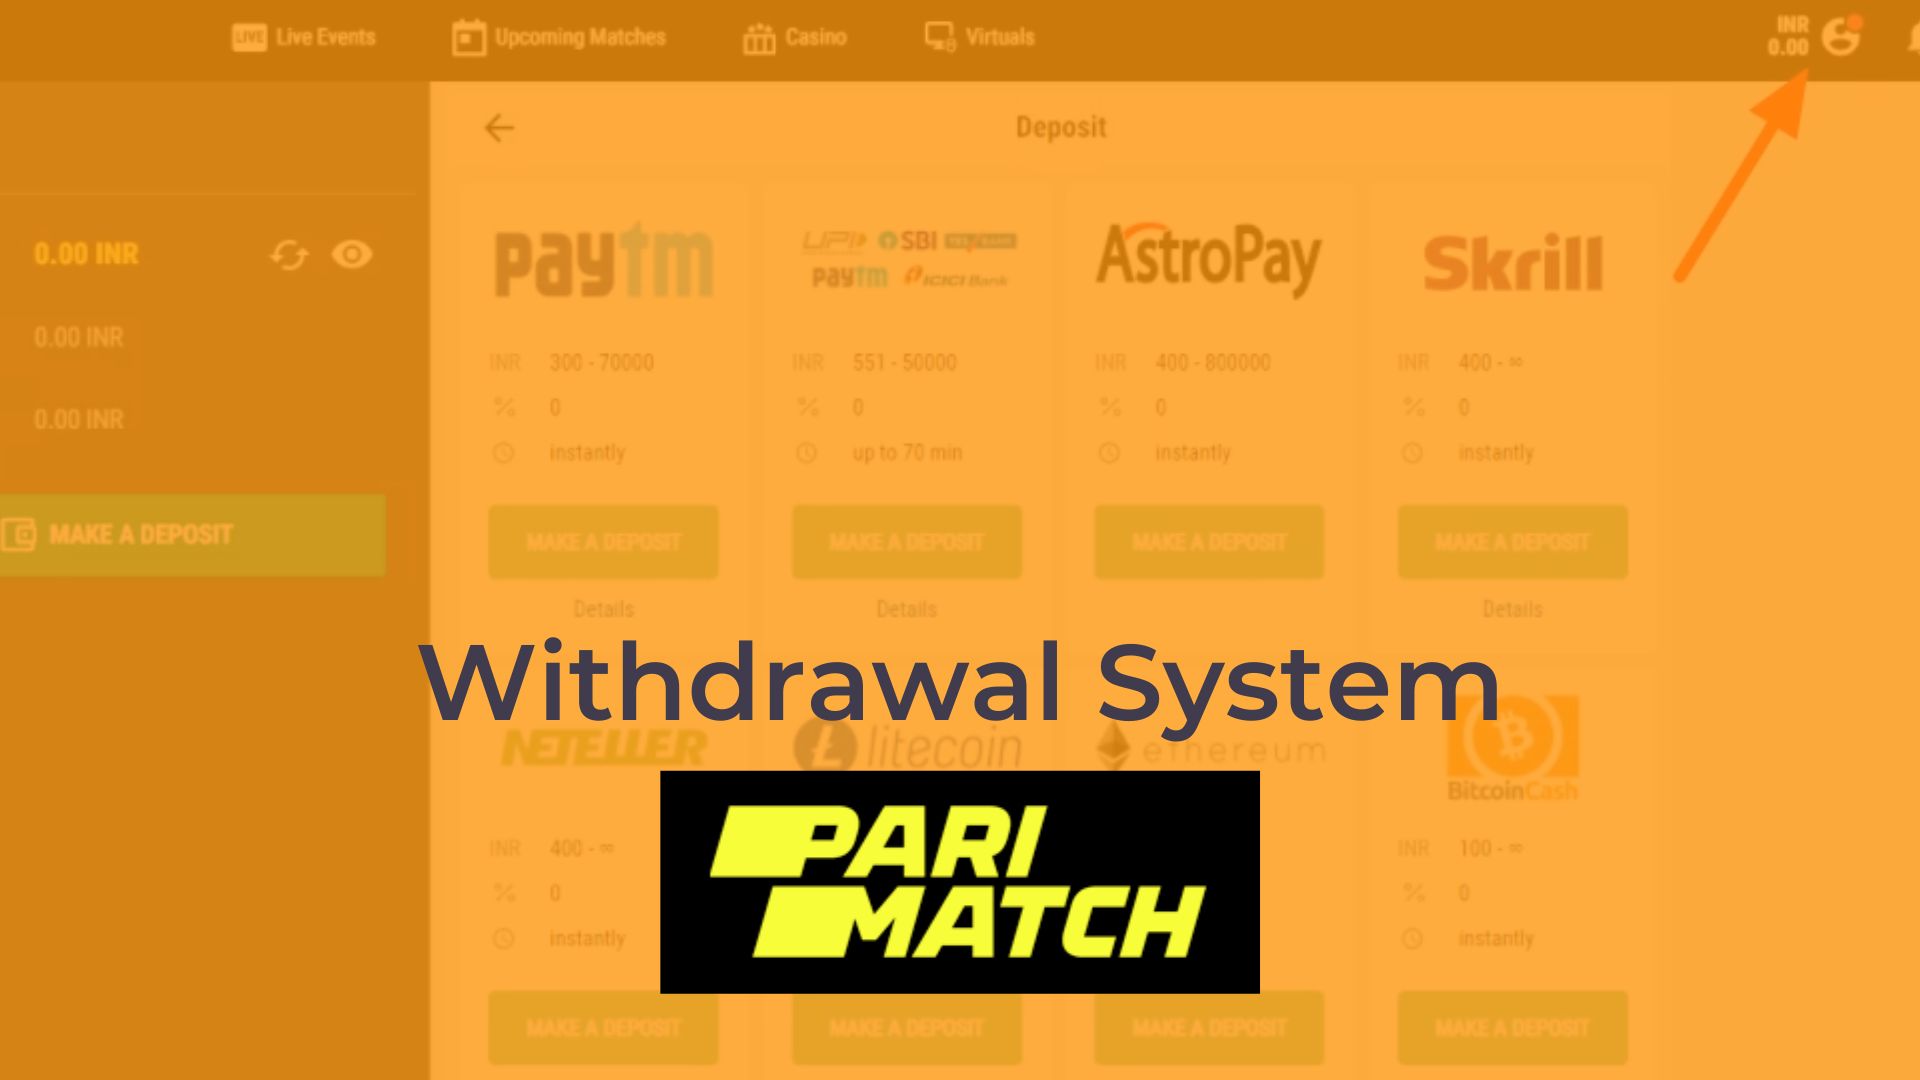 Parimatch's Withdrawal System